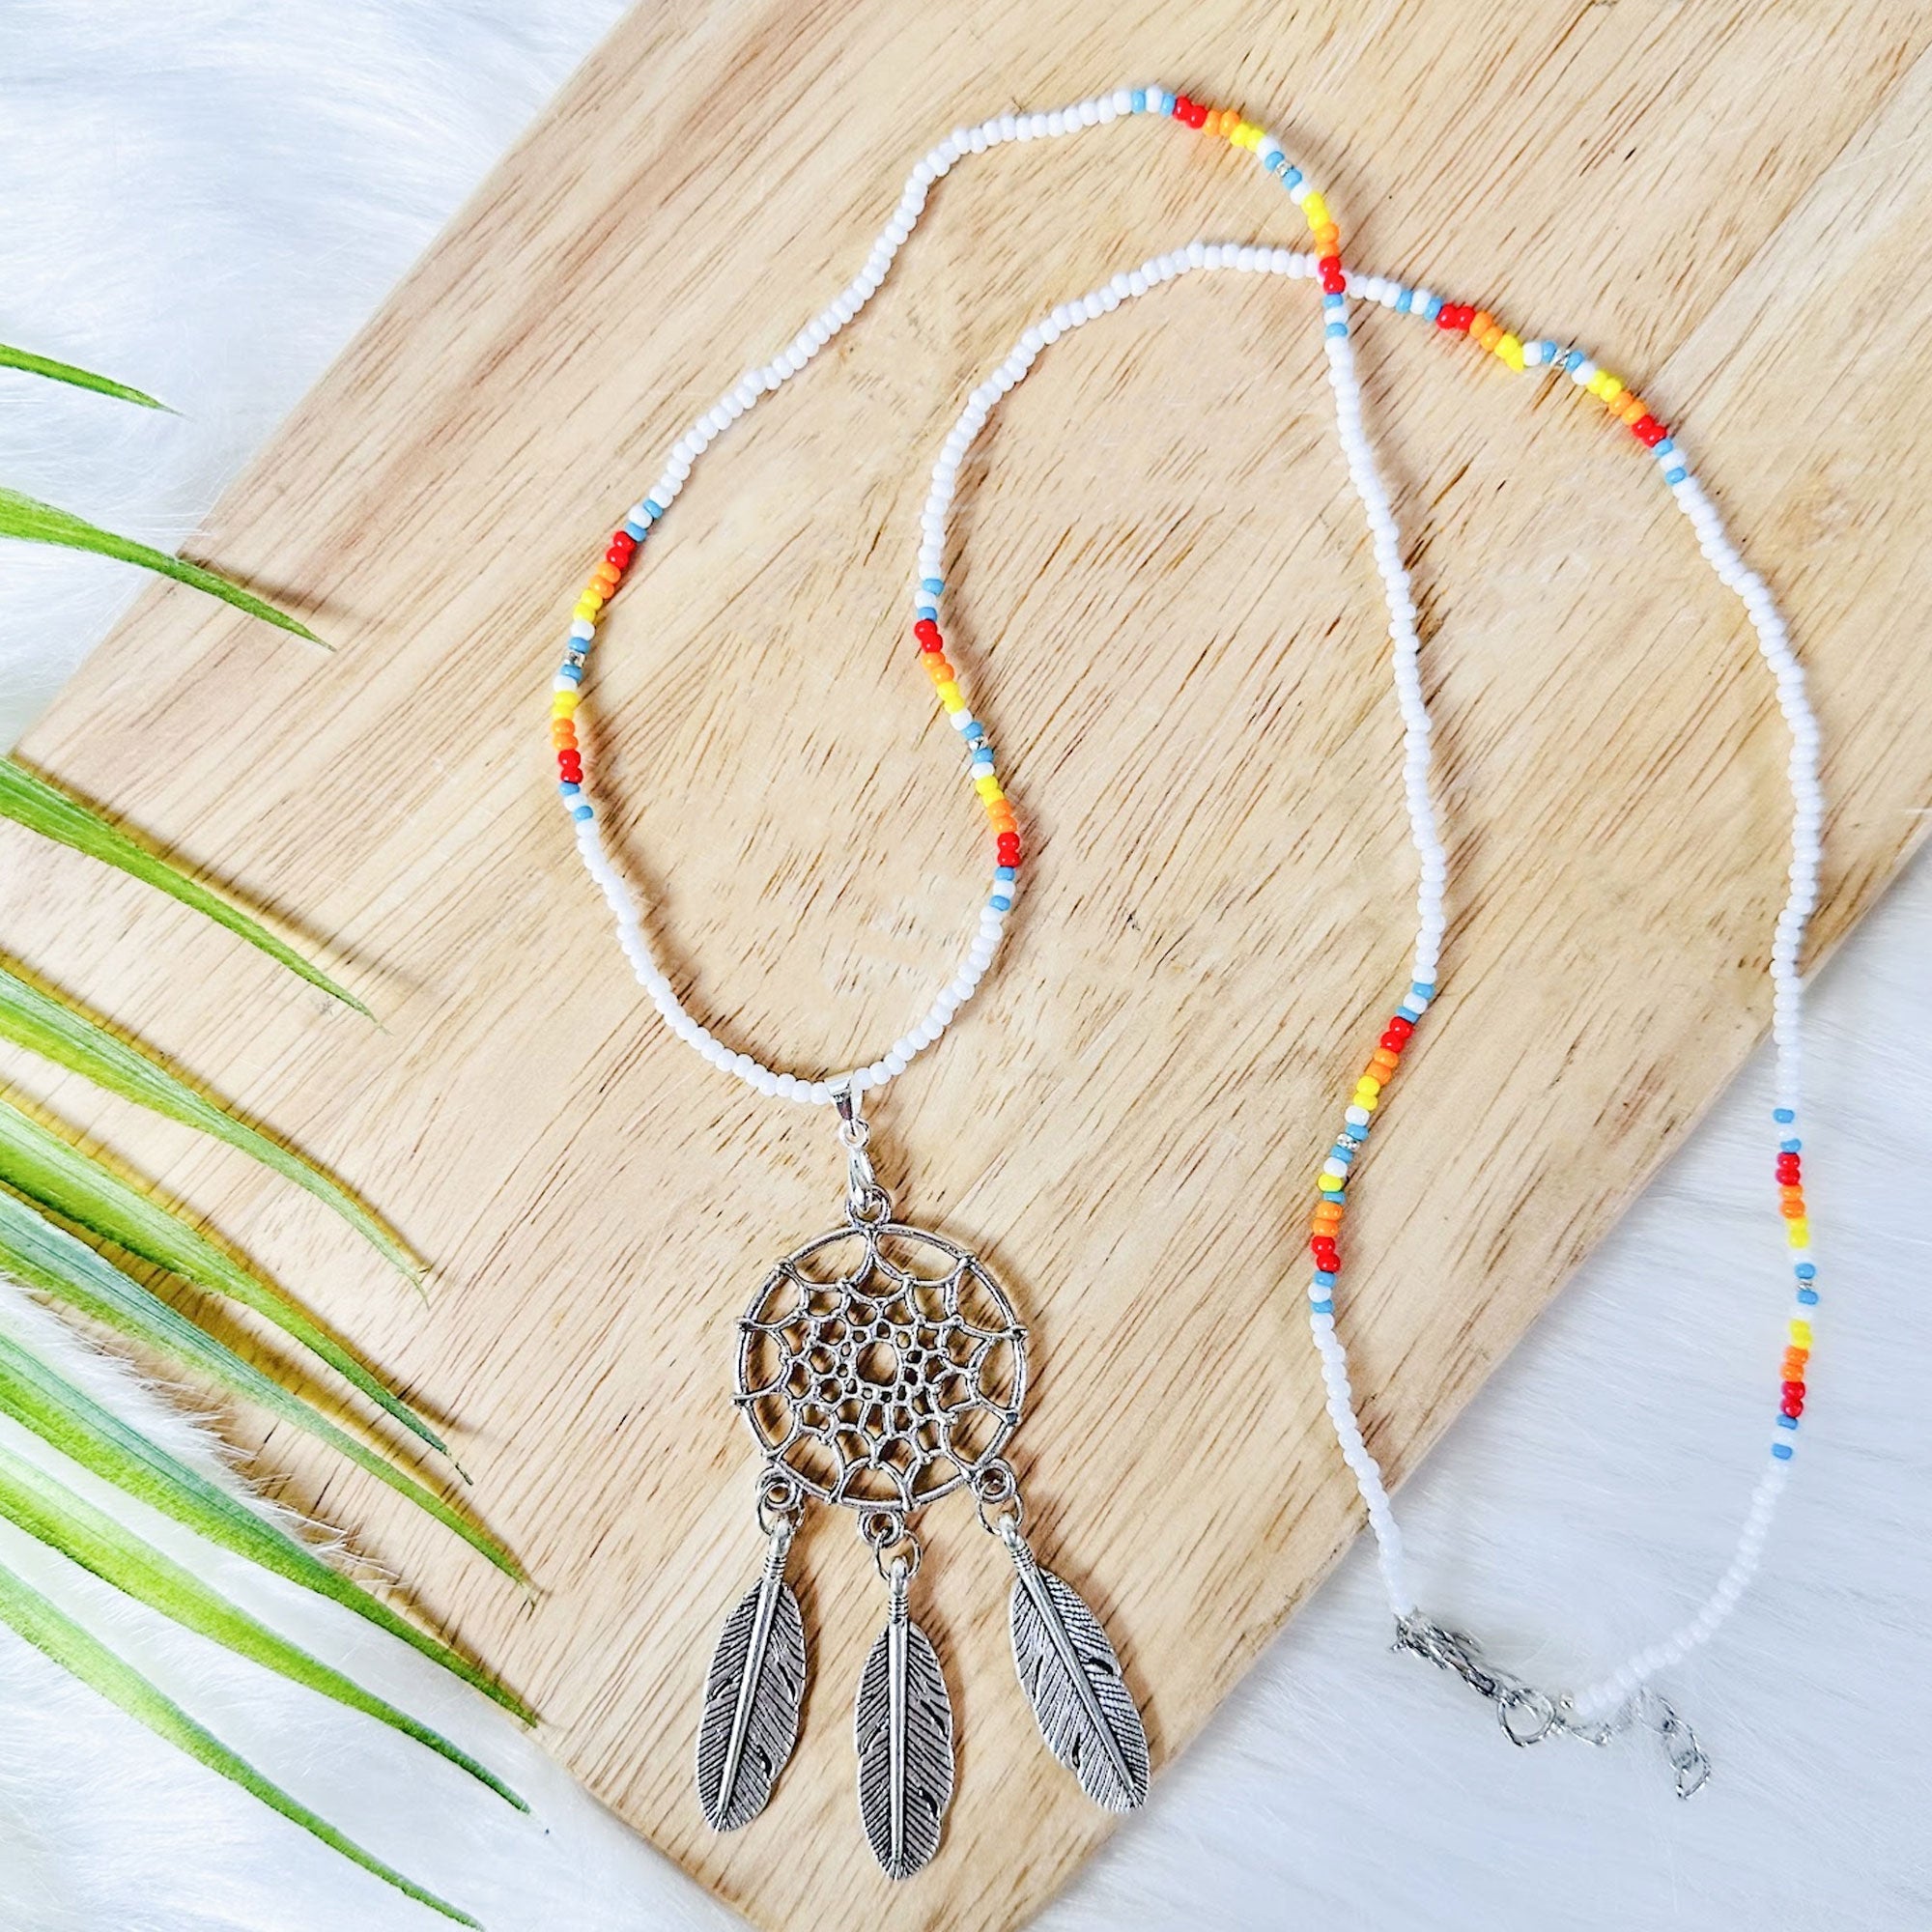 Long Silver Dreamcatcher White Lightning Handmade Beaded Necklace For Women With Native American Style